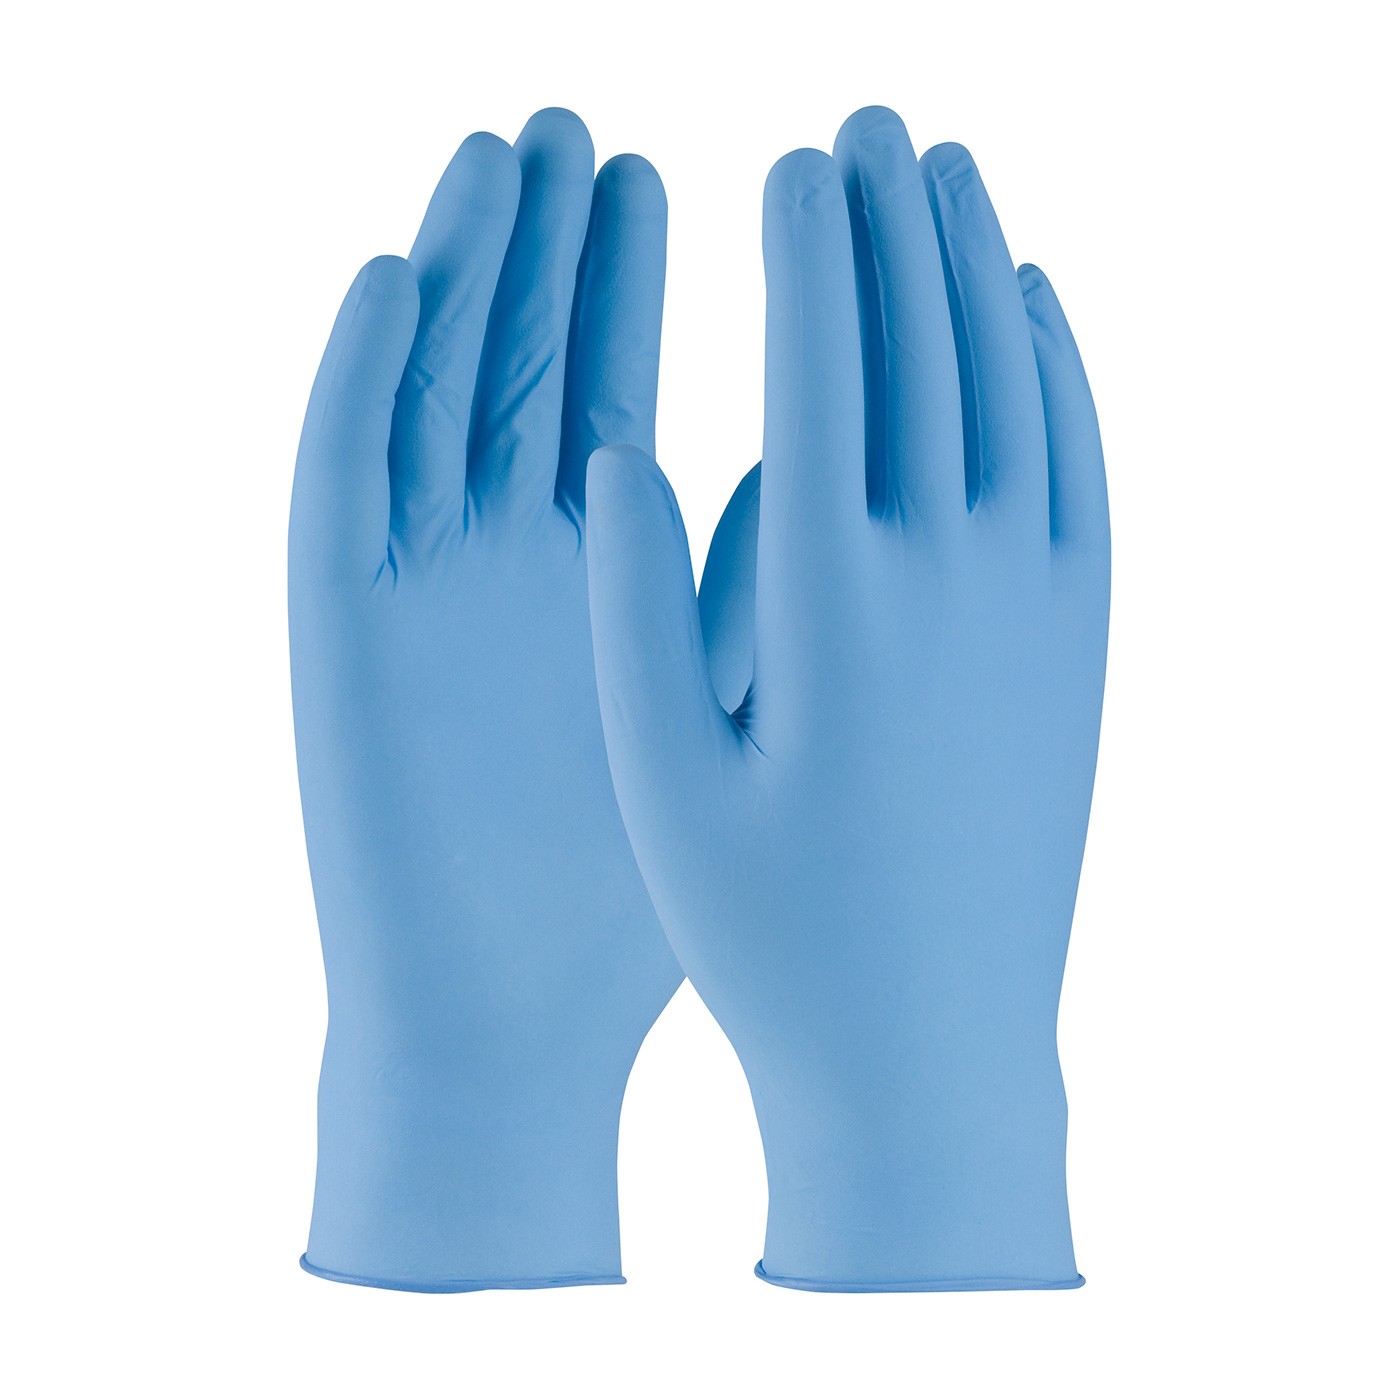 Ambi-dex® Turbo Disposable Nitrile Glove, Powder Free with Textured Grip - 5 mil  (#63-332PF)